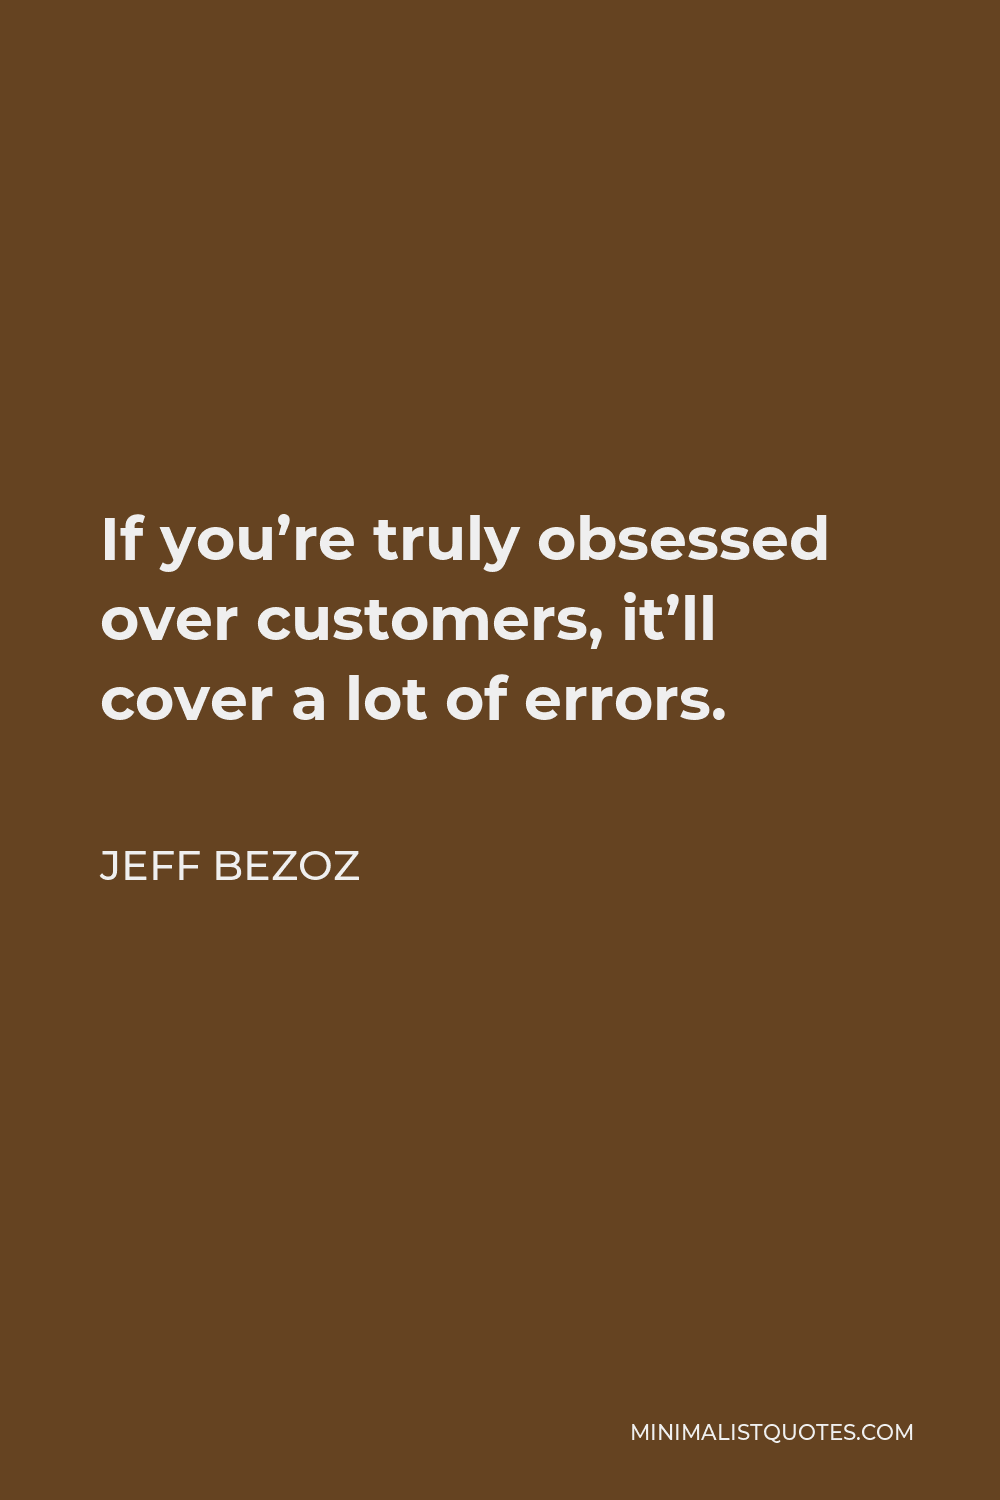 Jeff Bezoz Quote - If you’re truly obsessed over customers, it’ll cover a lot of errors.